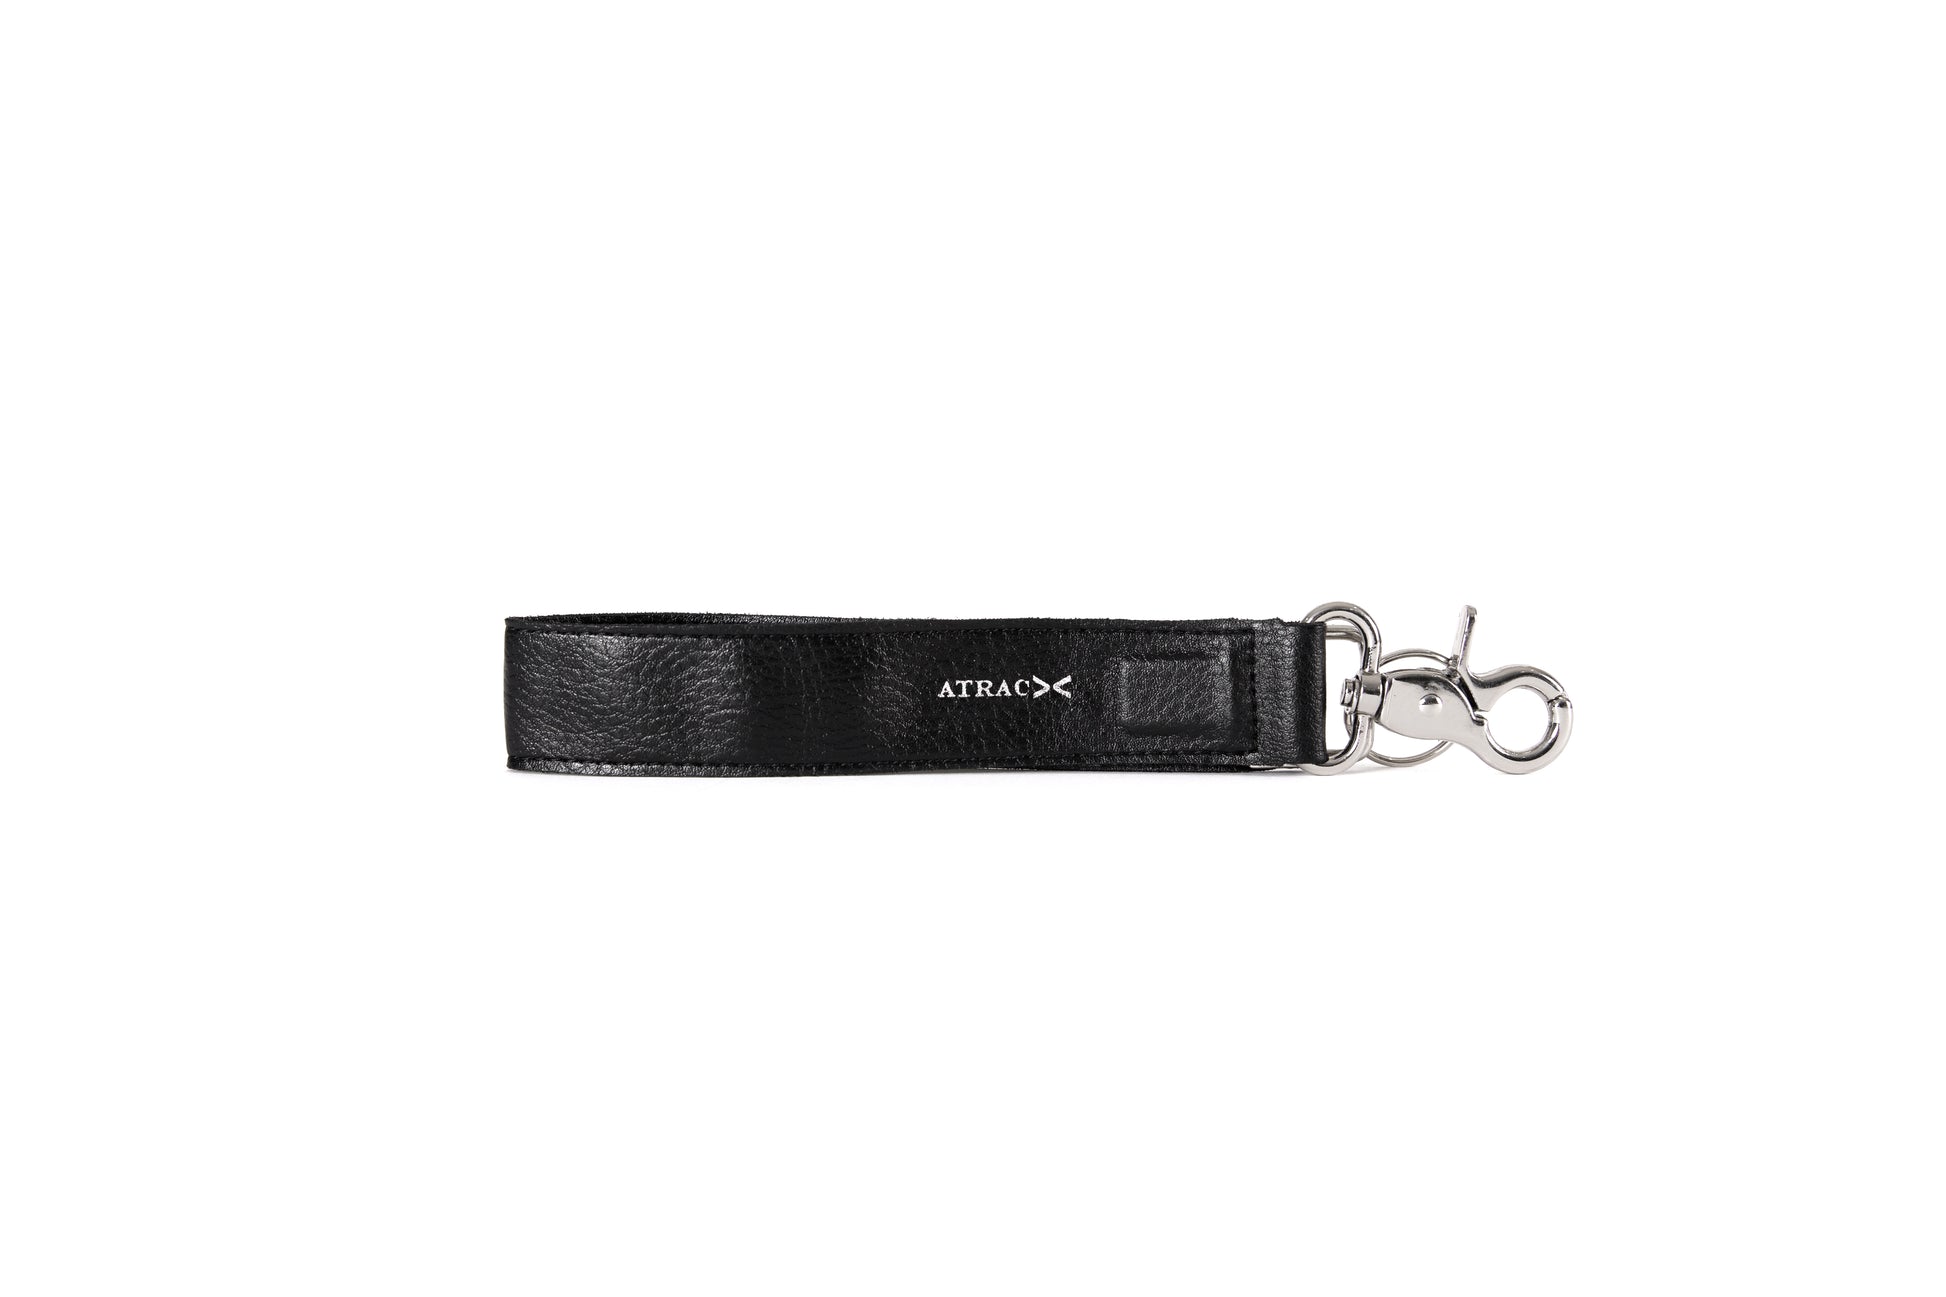  MNGARISTA Wristlet Strap for Key, Hand Wrist Lanyard Key Chain  Holder, Black : Office Products